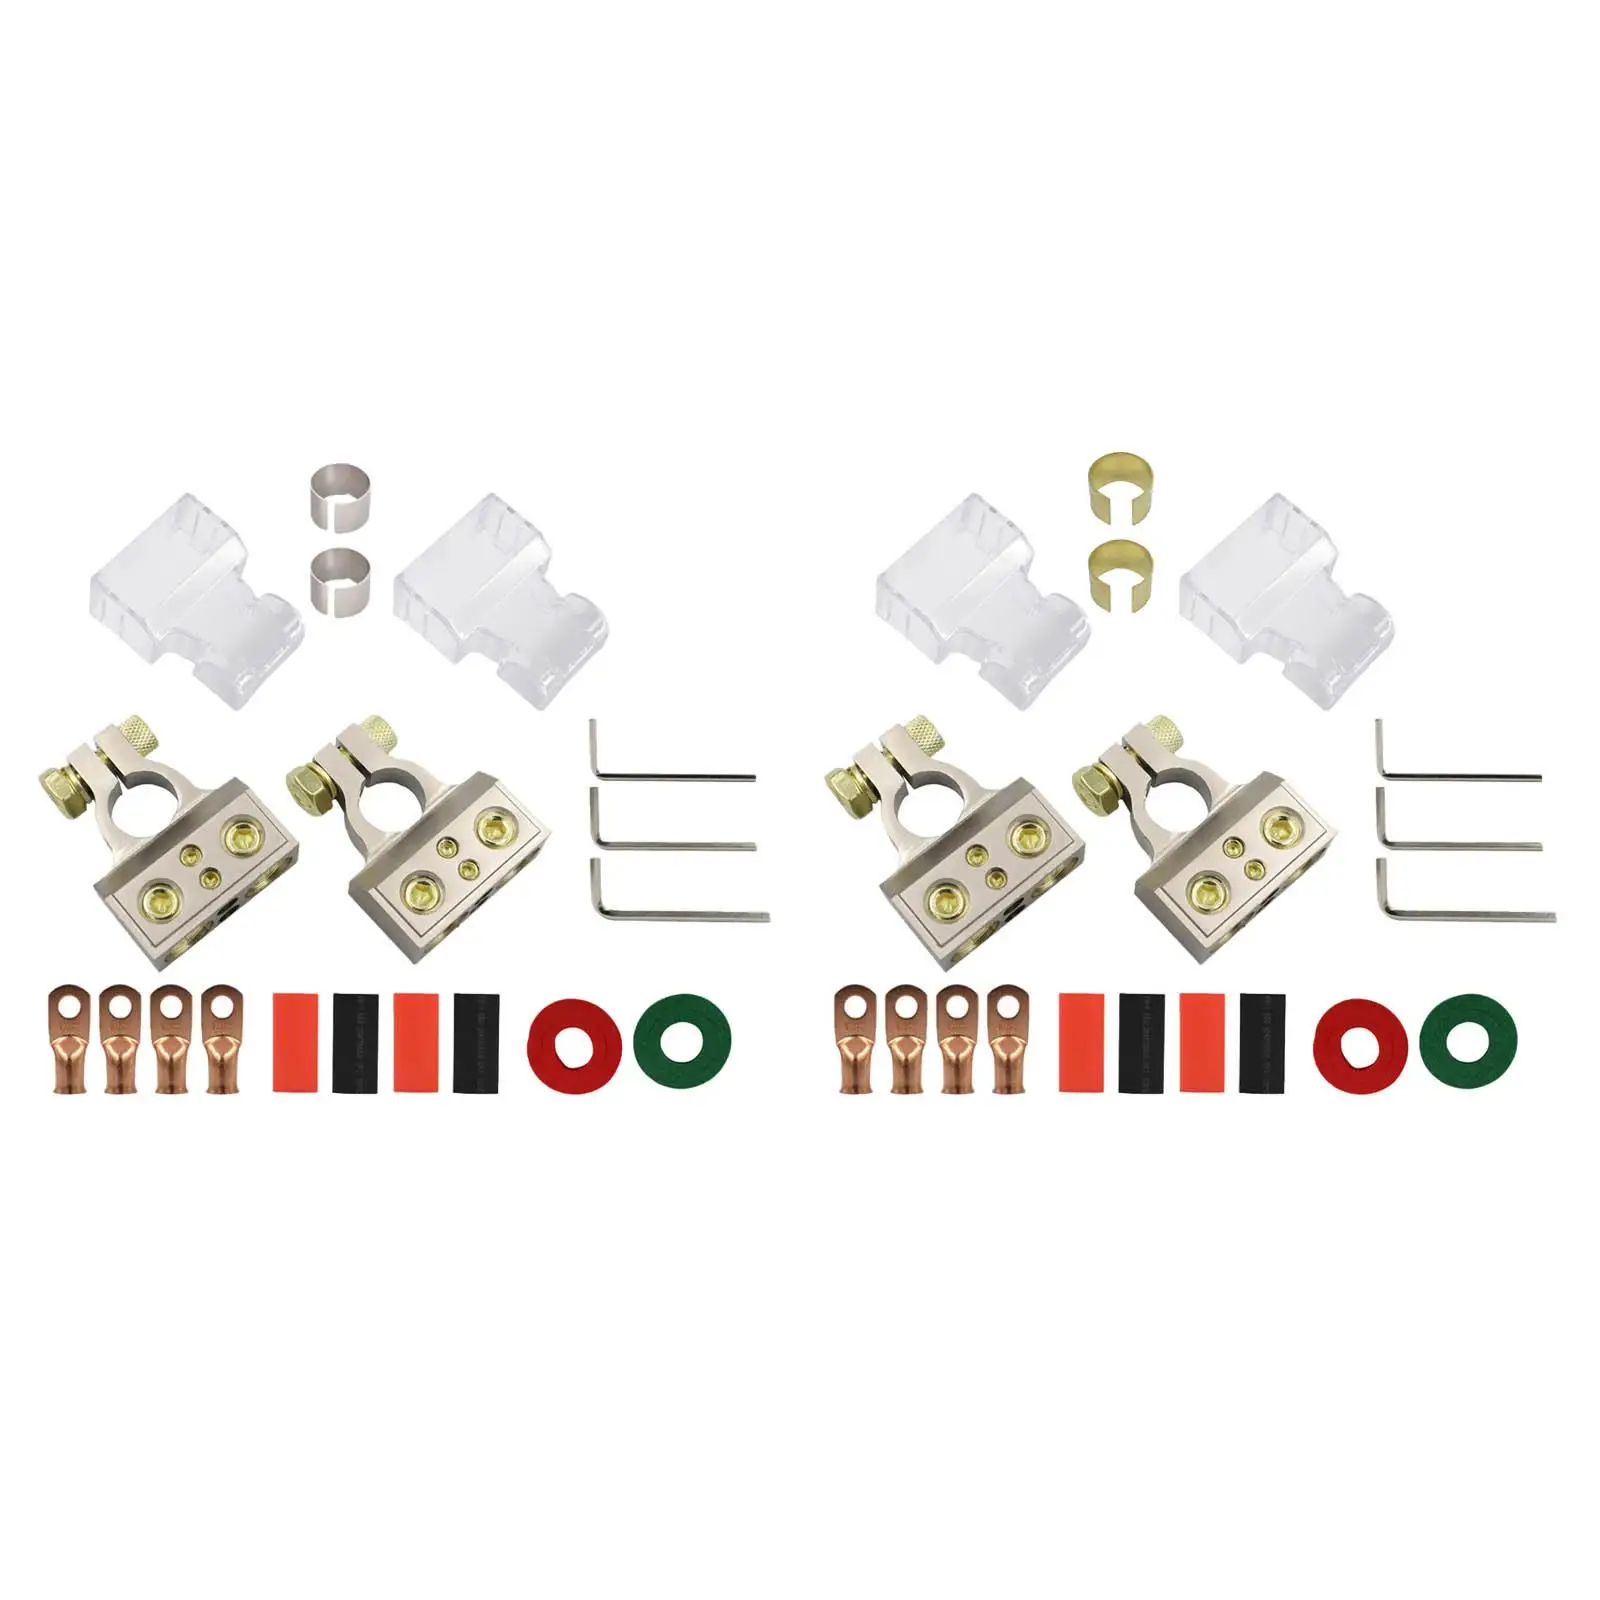 Battery Terminals Connectors Clamps Universal for Marine Vehicle Boat